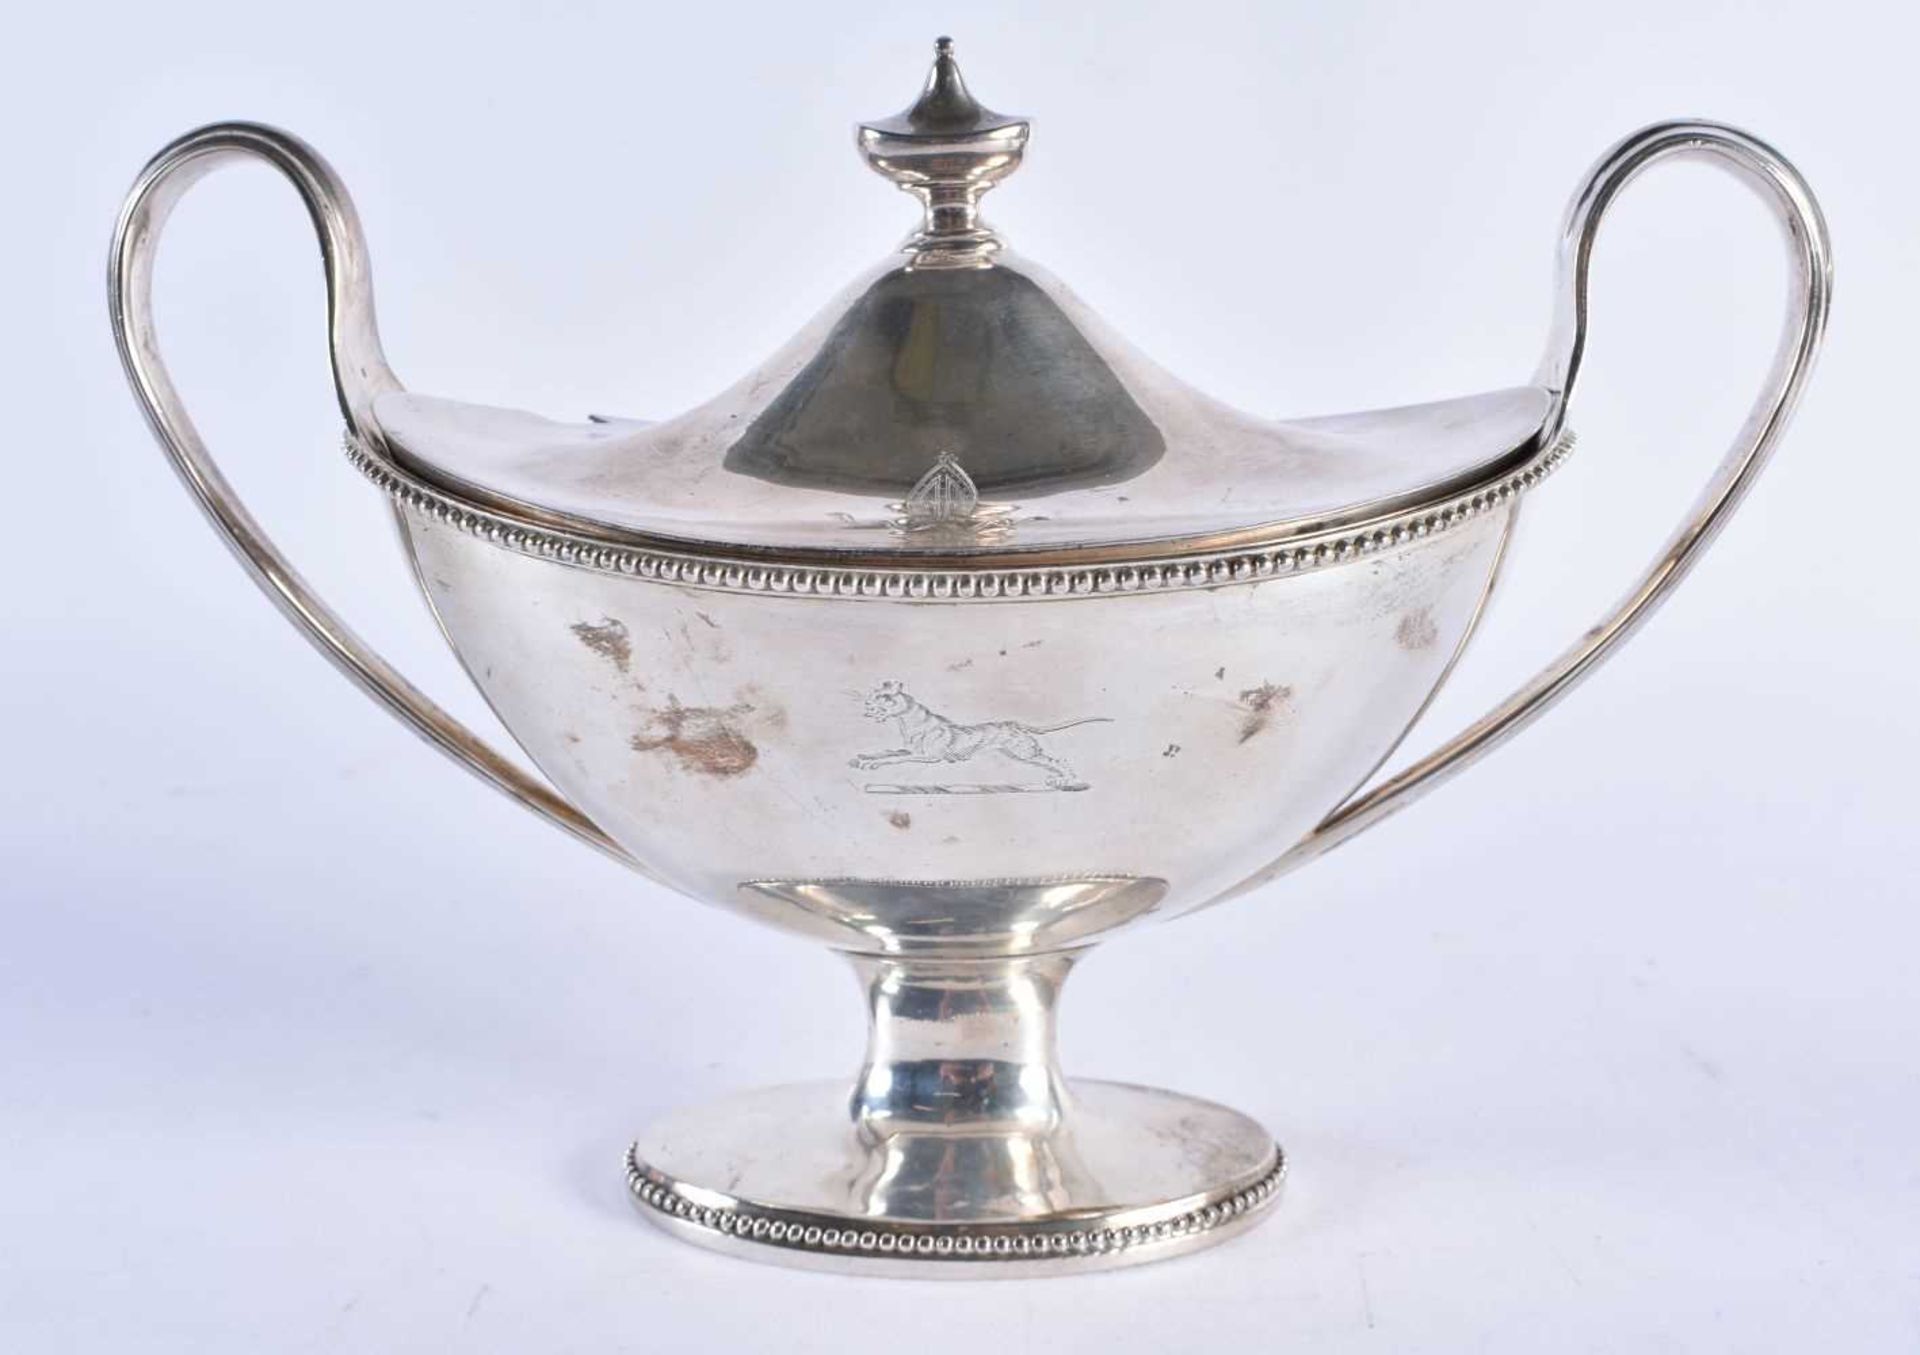 A GEORGE III SILVER SAUCE TUREEN AND COVER with interesting Bishops Mitre crest. 560 grams. London